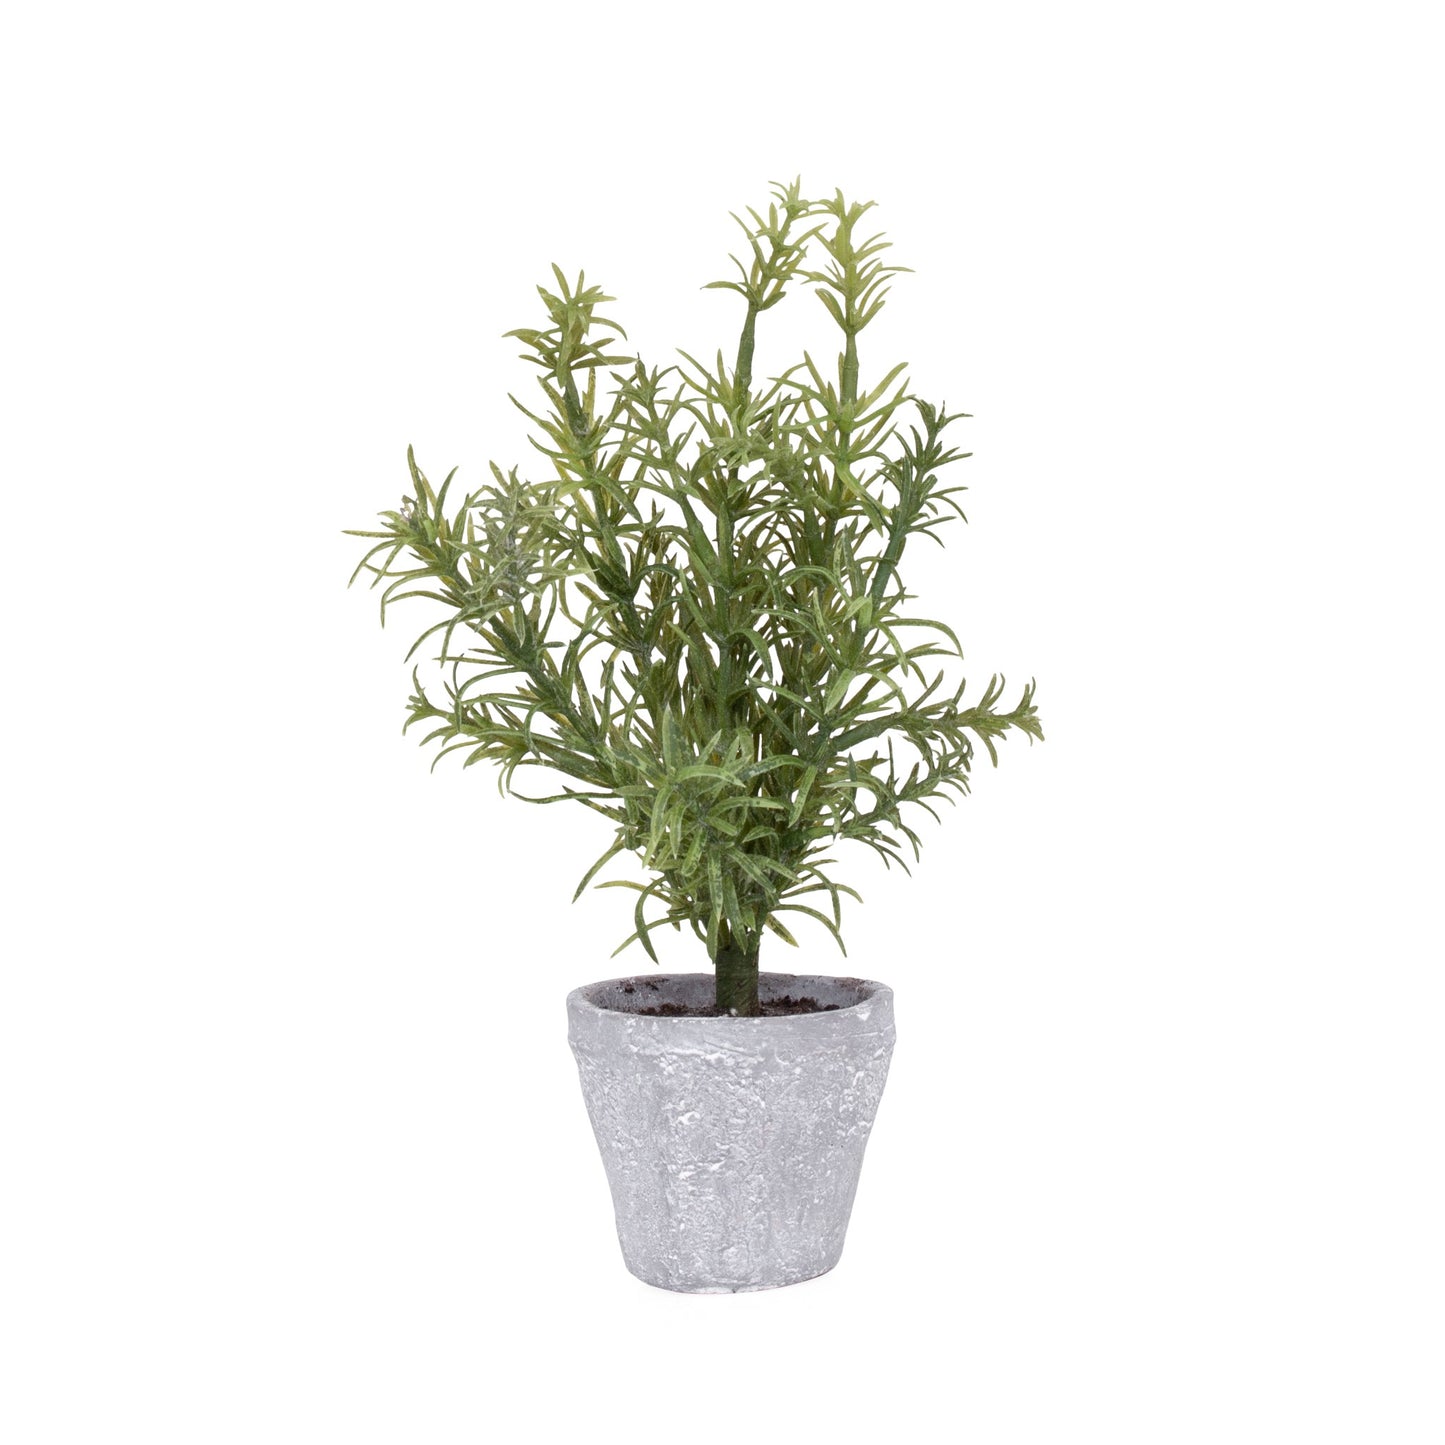 Provence Rustic Rosemary